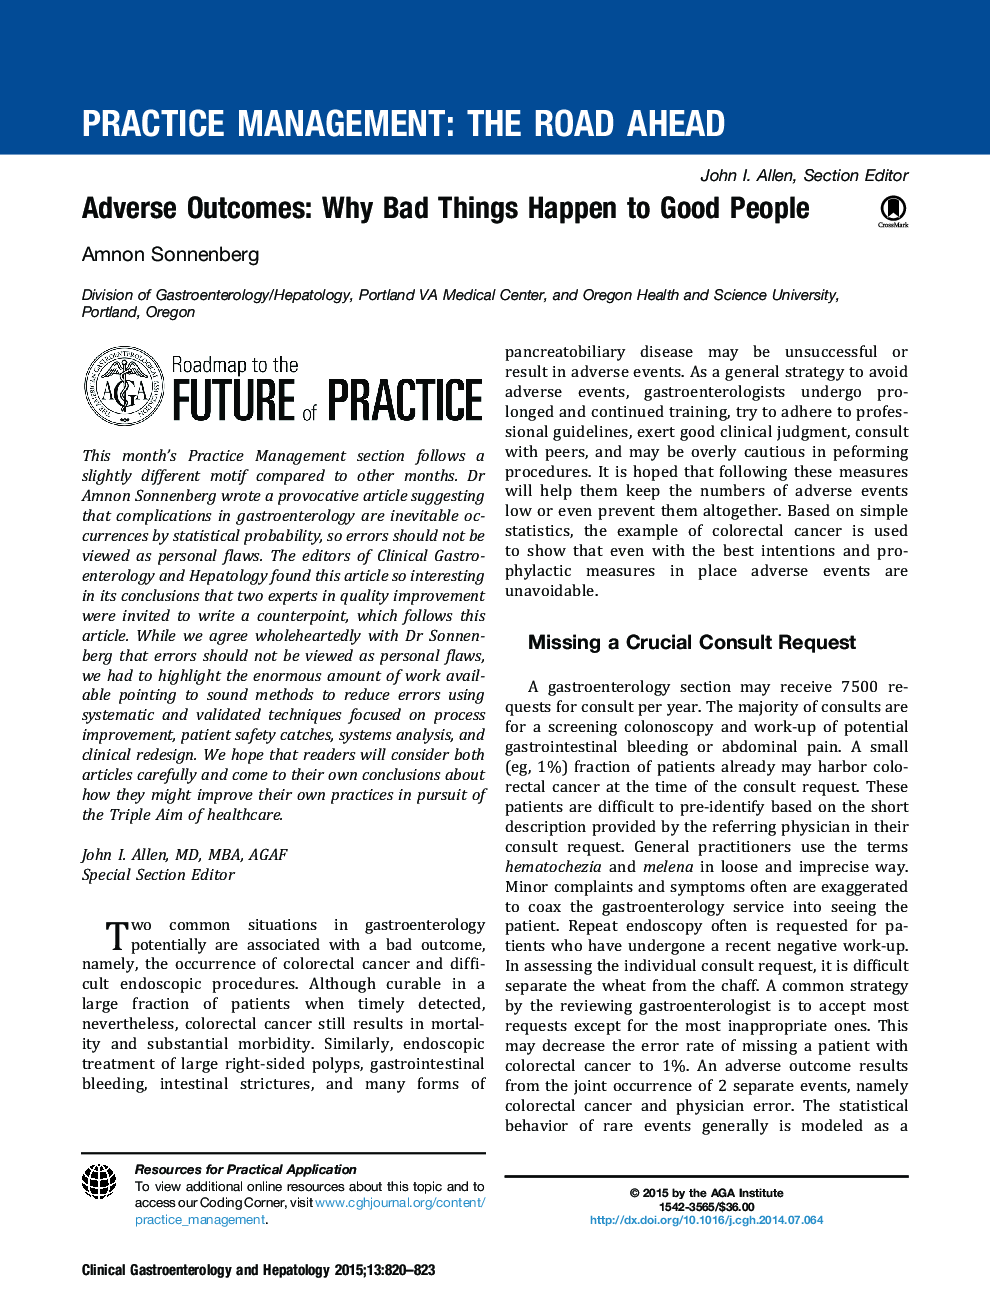 Adverse Outcomes: Why Bad Things Happen to Good People